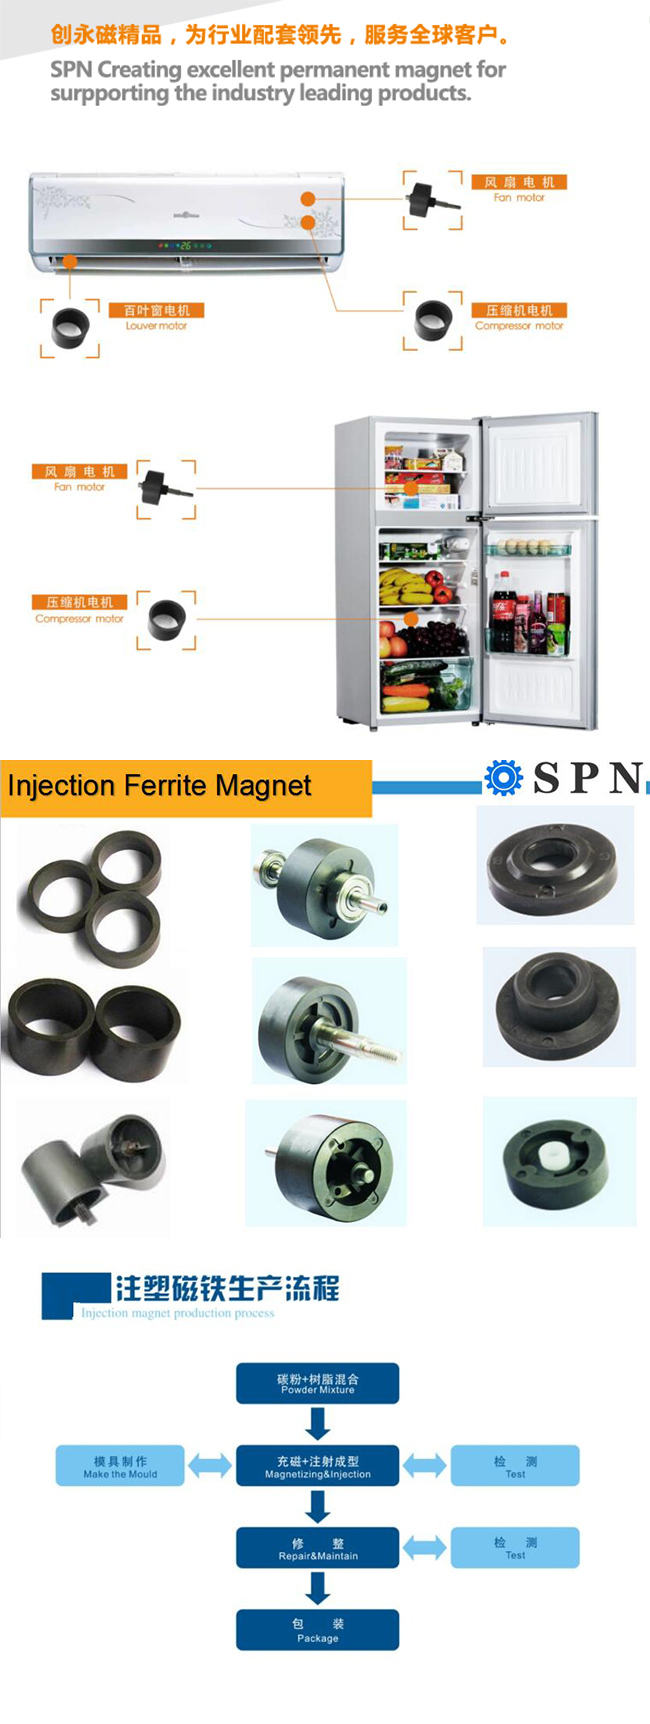 Ceramic /Ferrite Magnet/ Ferrite Injection Multipole Magnet with Shaft for Motor